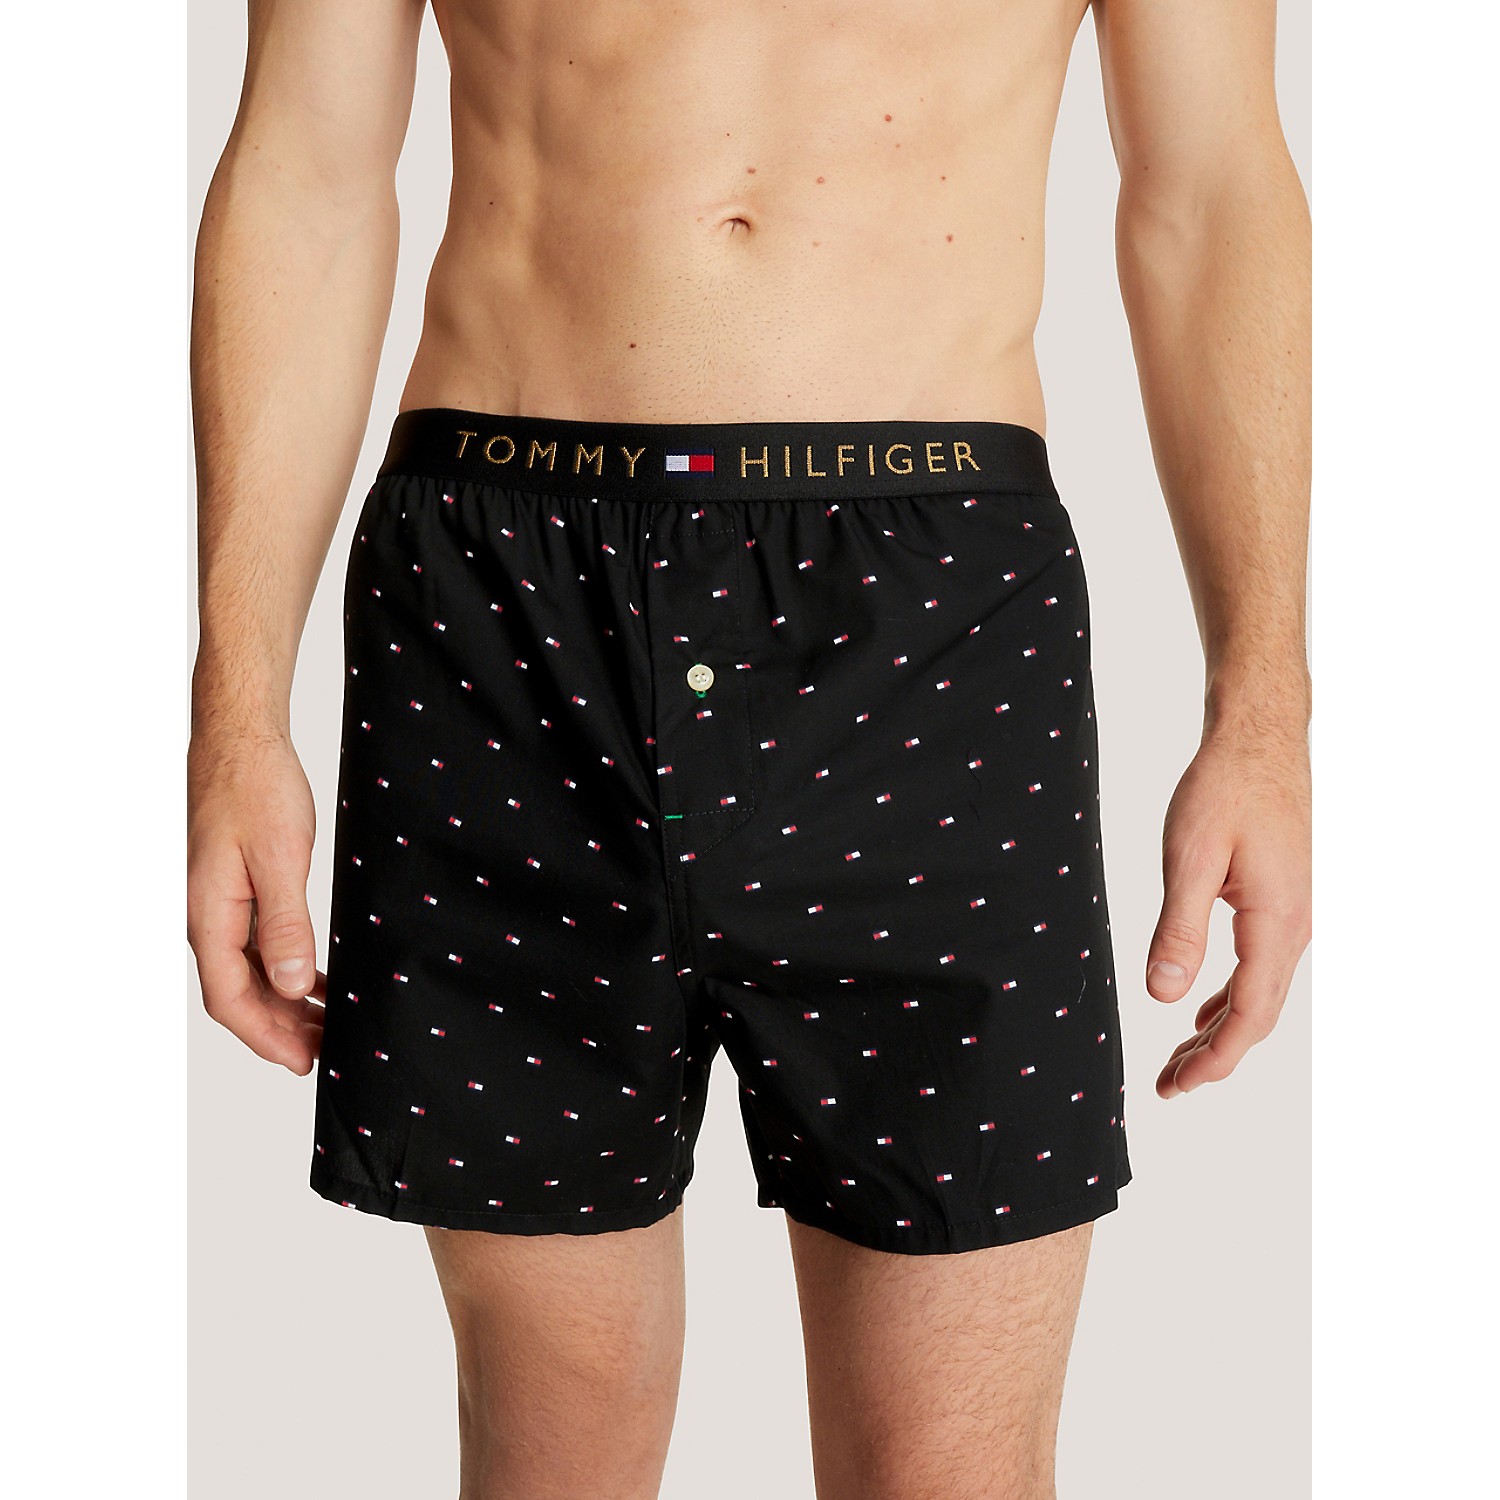 TOMMY HILFIGER Regular Fit Microflag Woven Boxer